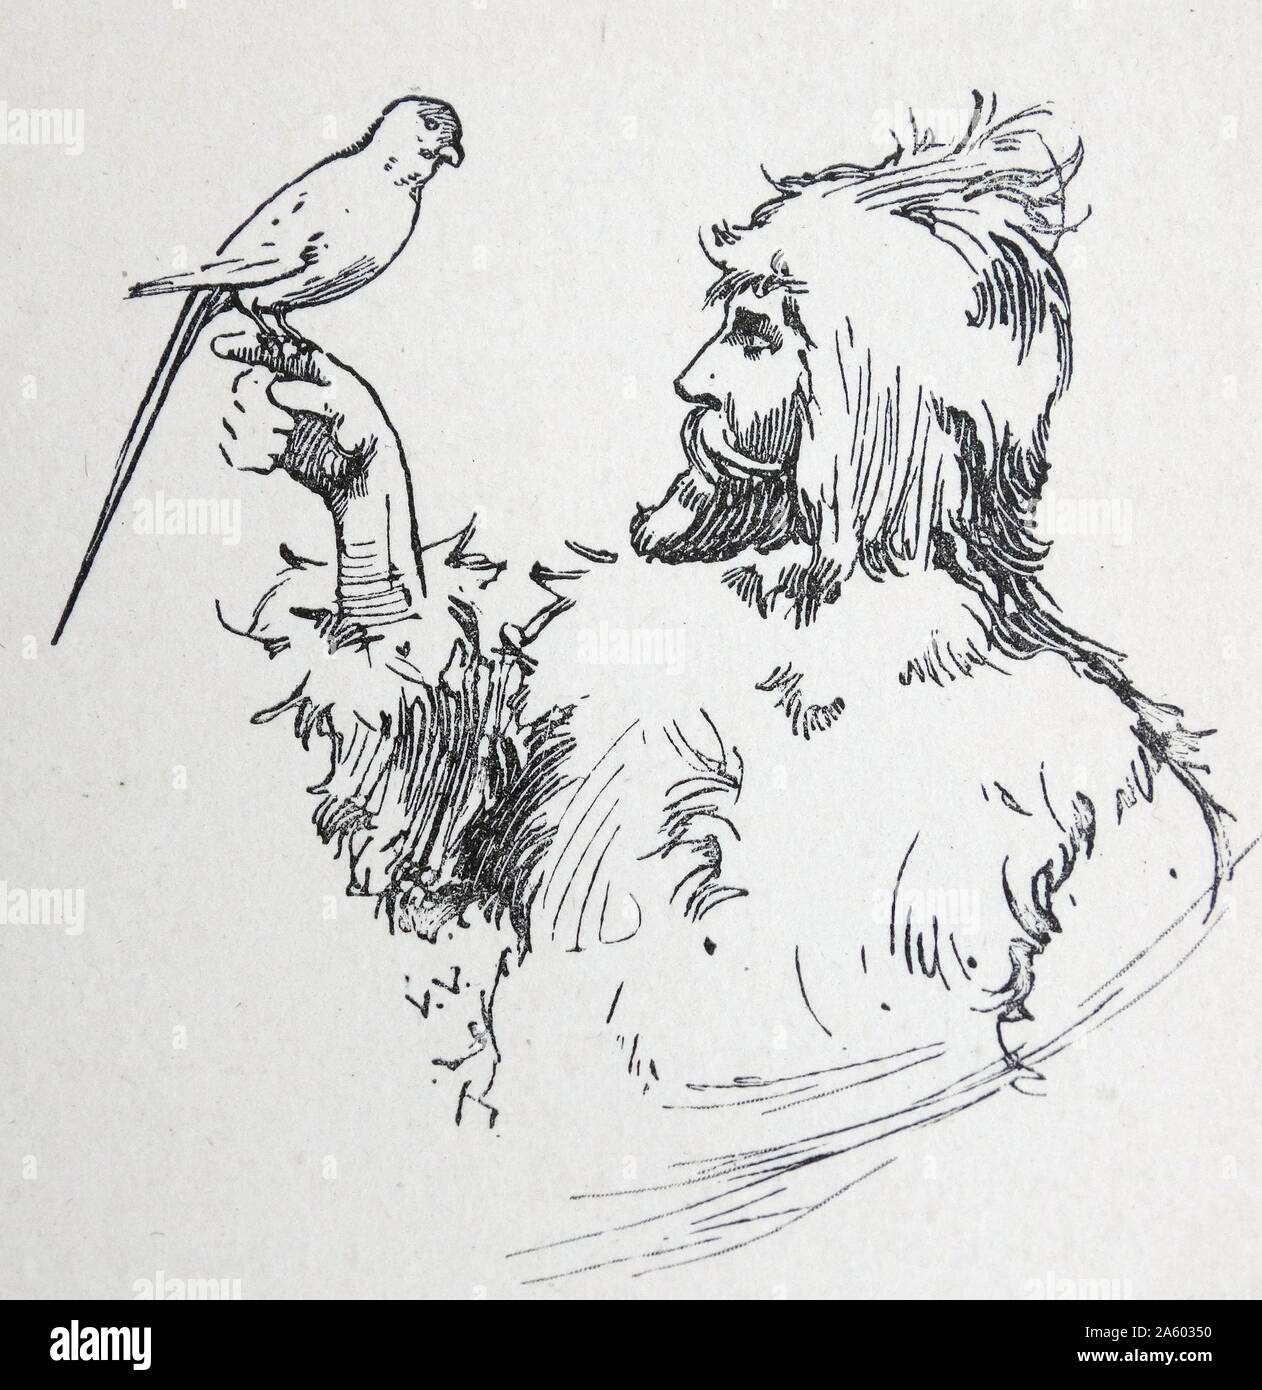 Illustration from a nineteenth century edition of 'Robinson Crusoe' a novel by Daniel Defoe. The book was first published on 25 April 1719. It relates the story of Robinson Crusoe, stranded on a desert Island for 28 years and his subsequent fight for survival. Stock Photo